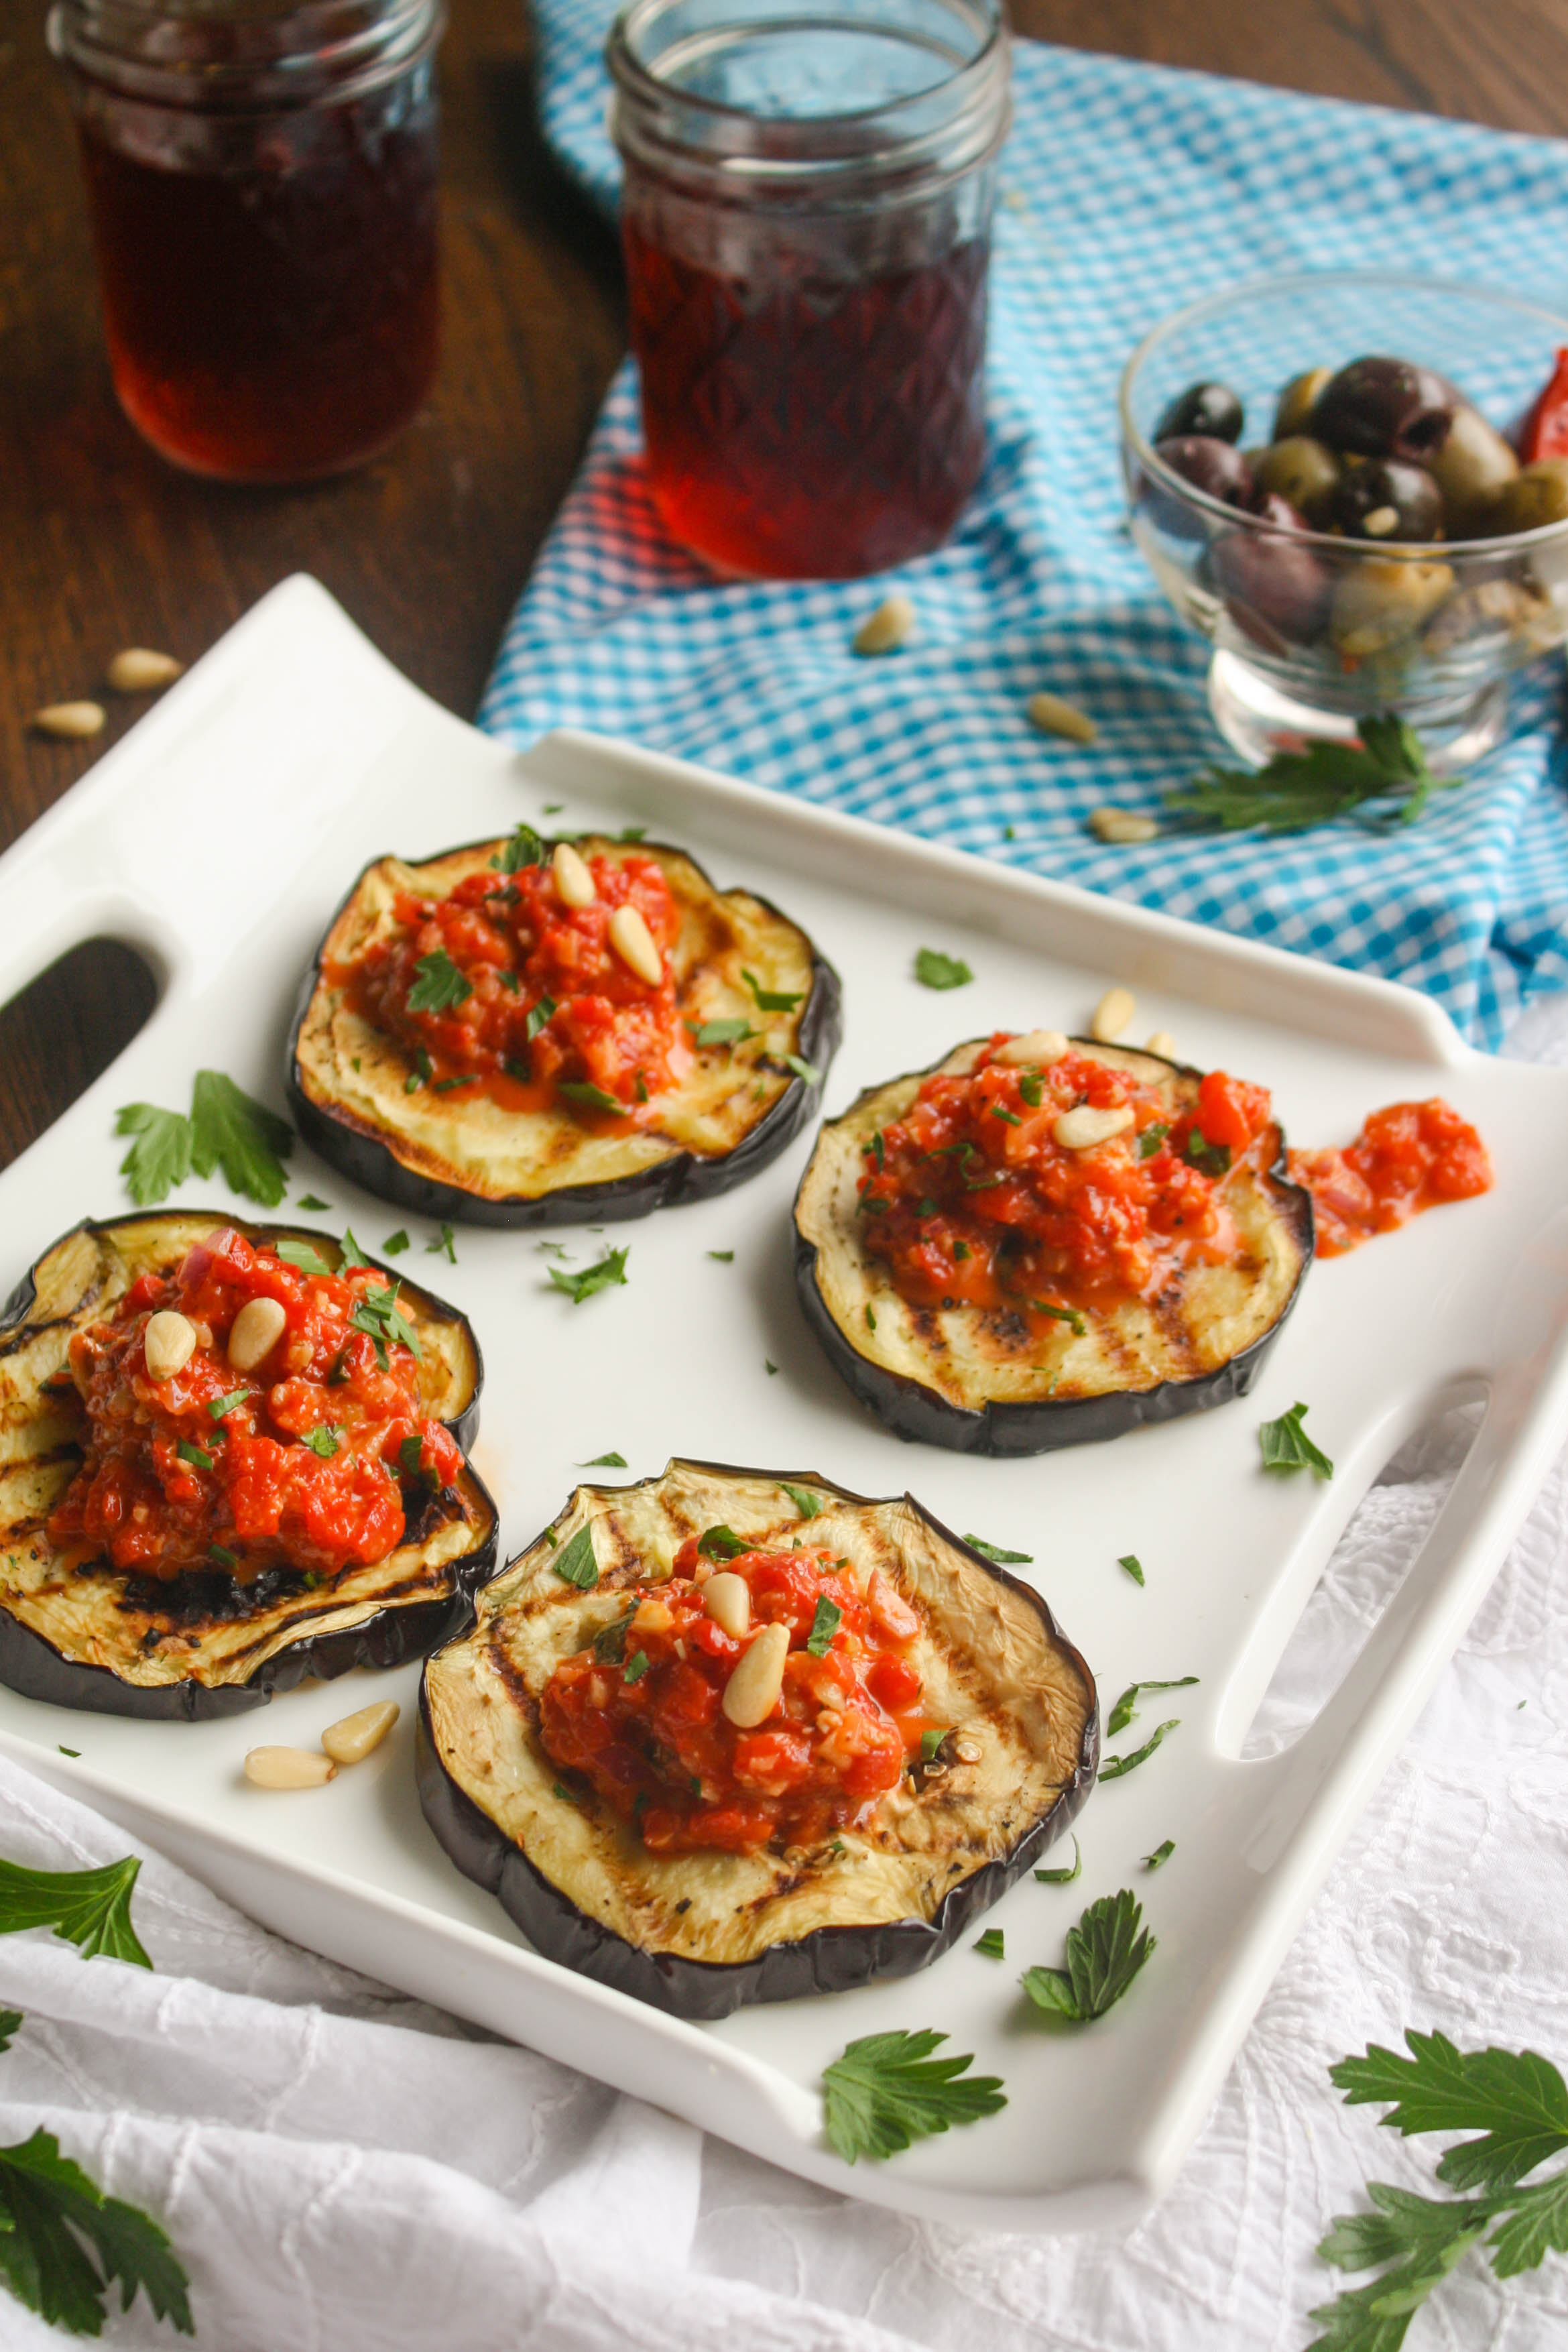 Grilled Eggplant with Roasted Red Pepper Tapenade is a summer seasonal dish that is perfect for any occasion. It's easy to make and full of flavor!